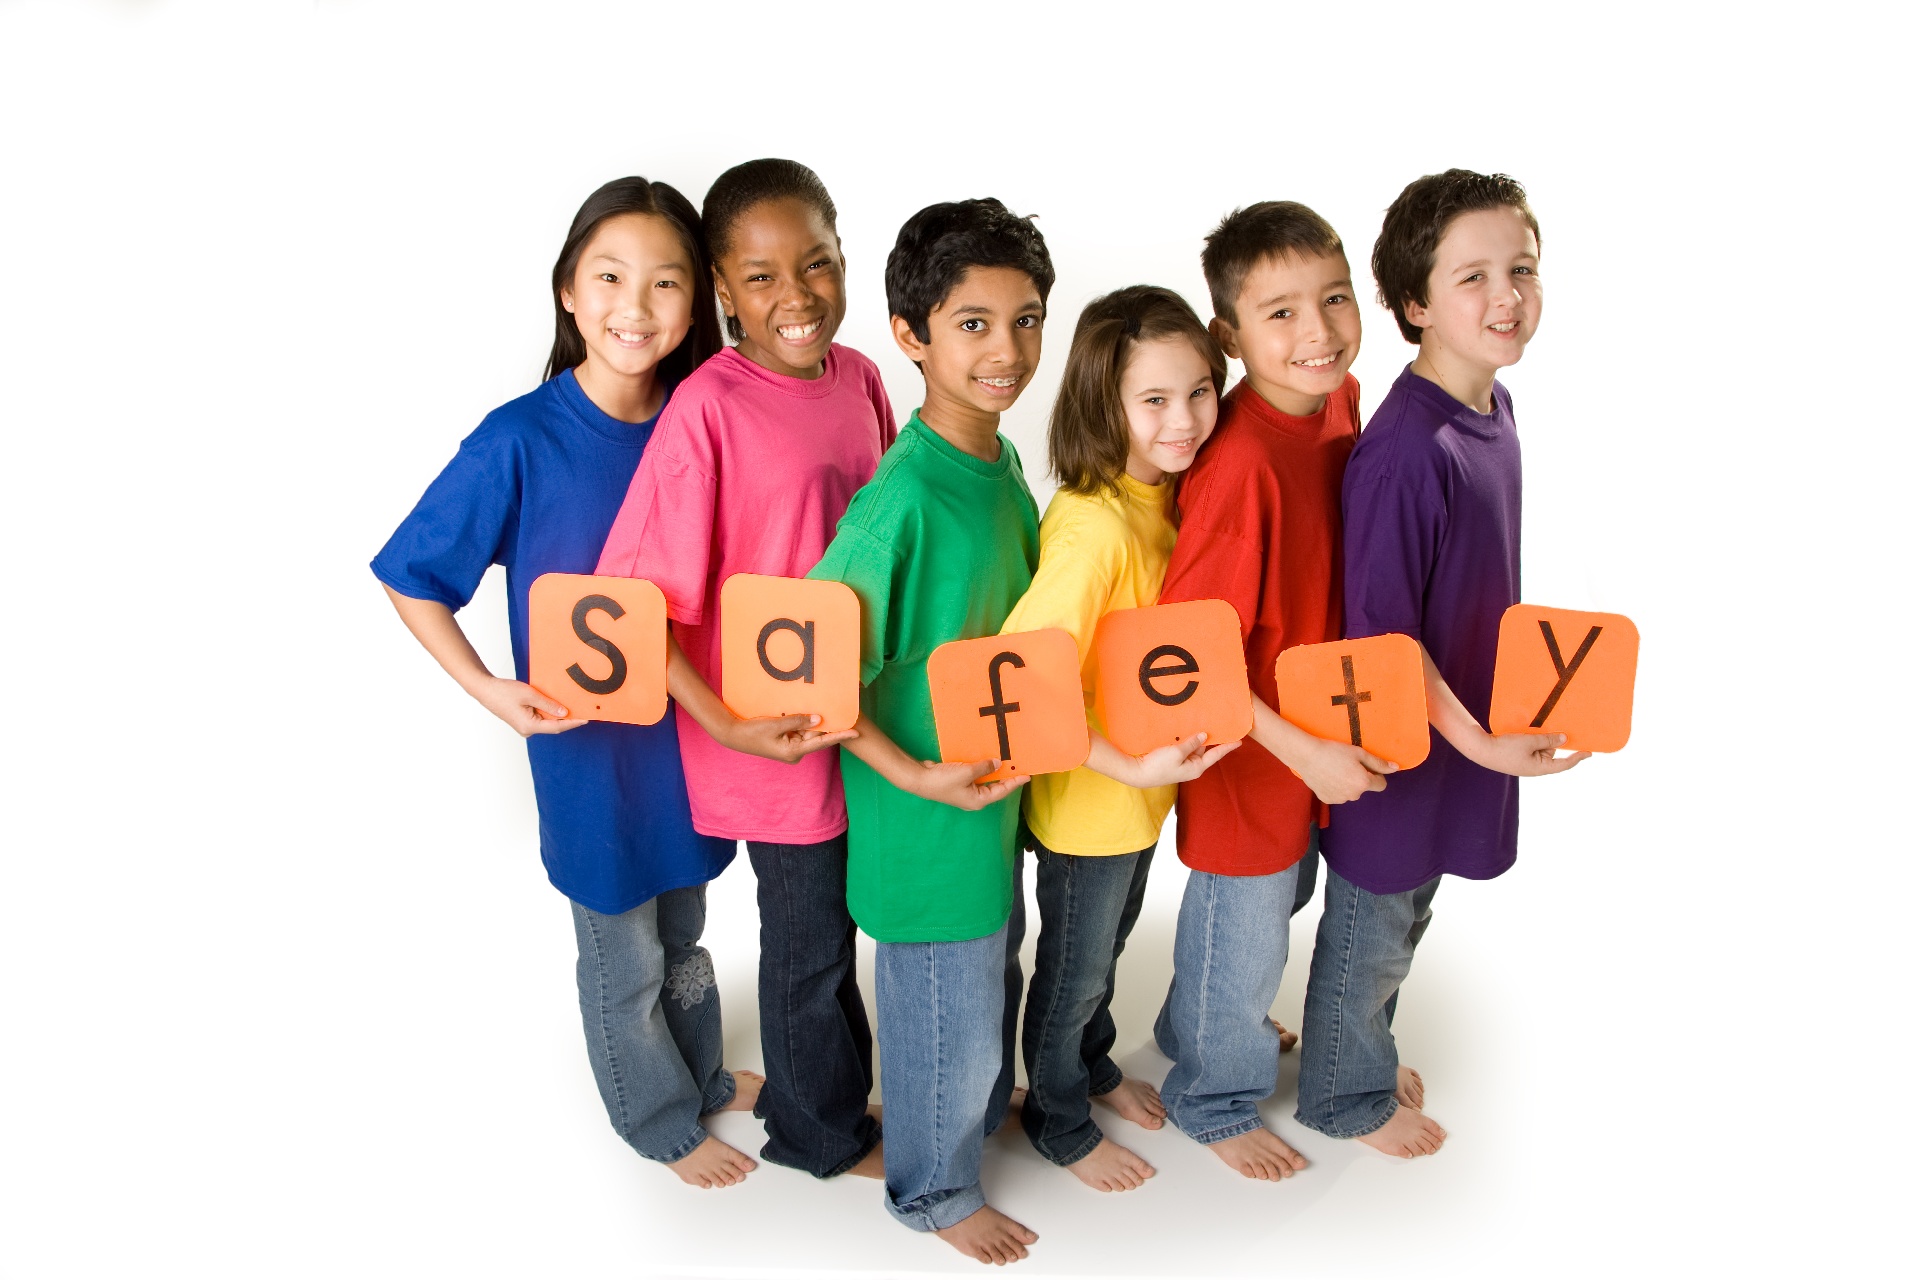 Elementary students holding up safety sign 